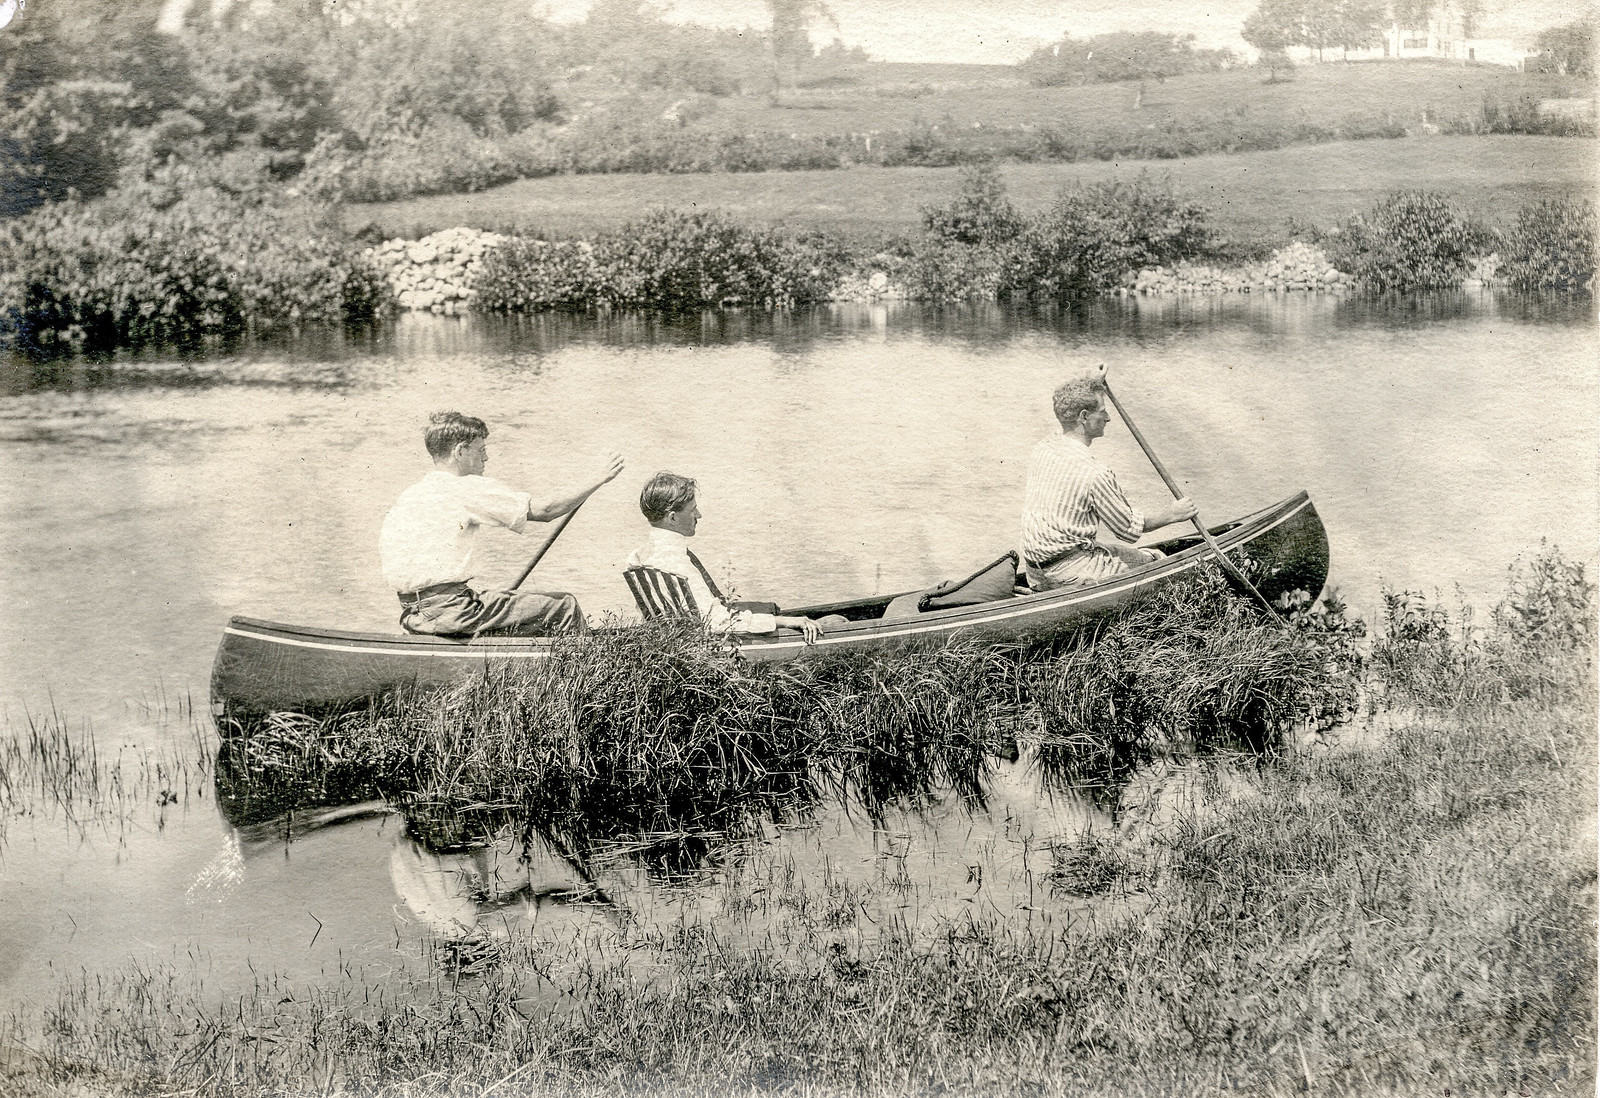 Canoeing on the Souhegan River